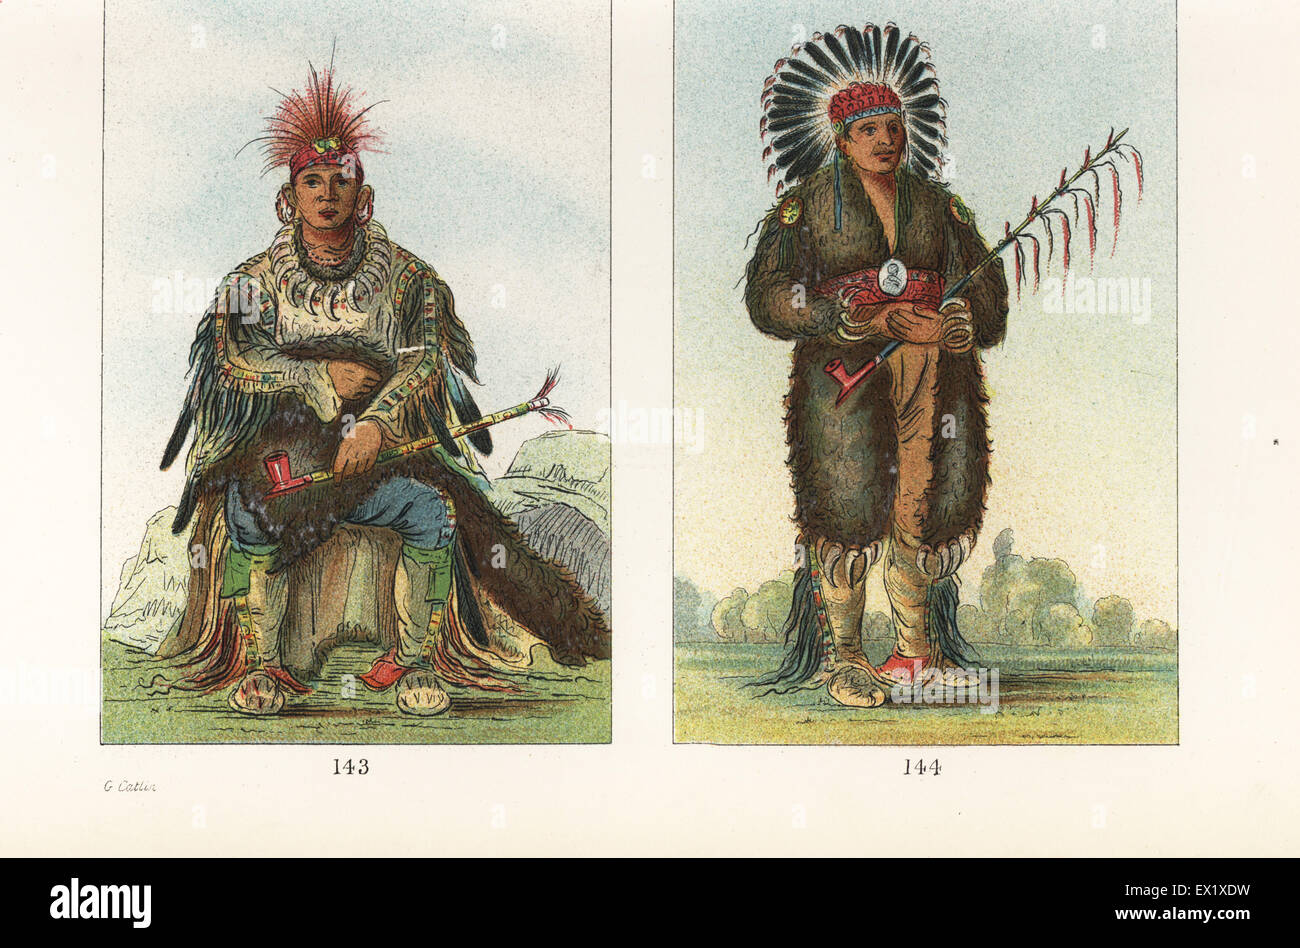 Chiefs of the Otoe nation: N-way-ke-sug-ga, He Who Strikes Two at Once wearing necklace of bear claws and robe fringed with scalp-locks 143, and Raw-no-way-woh-krah, Loose Pipe-Stem in skin of grizzly bear and eagle feather headdress 144. Handcoloured lithograph from George Catlin's Manners, Customs and Condition of the North American Indians, London, 1841. Stock Photo